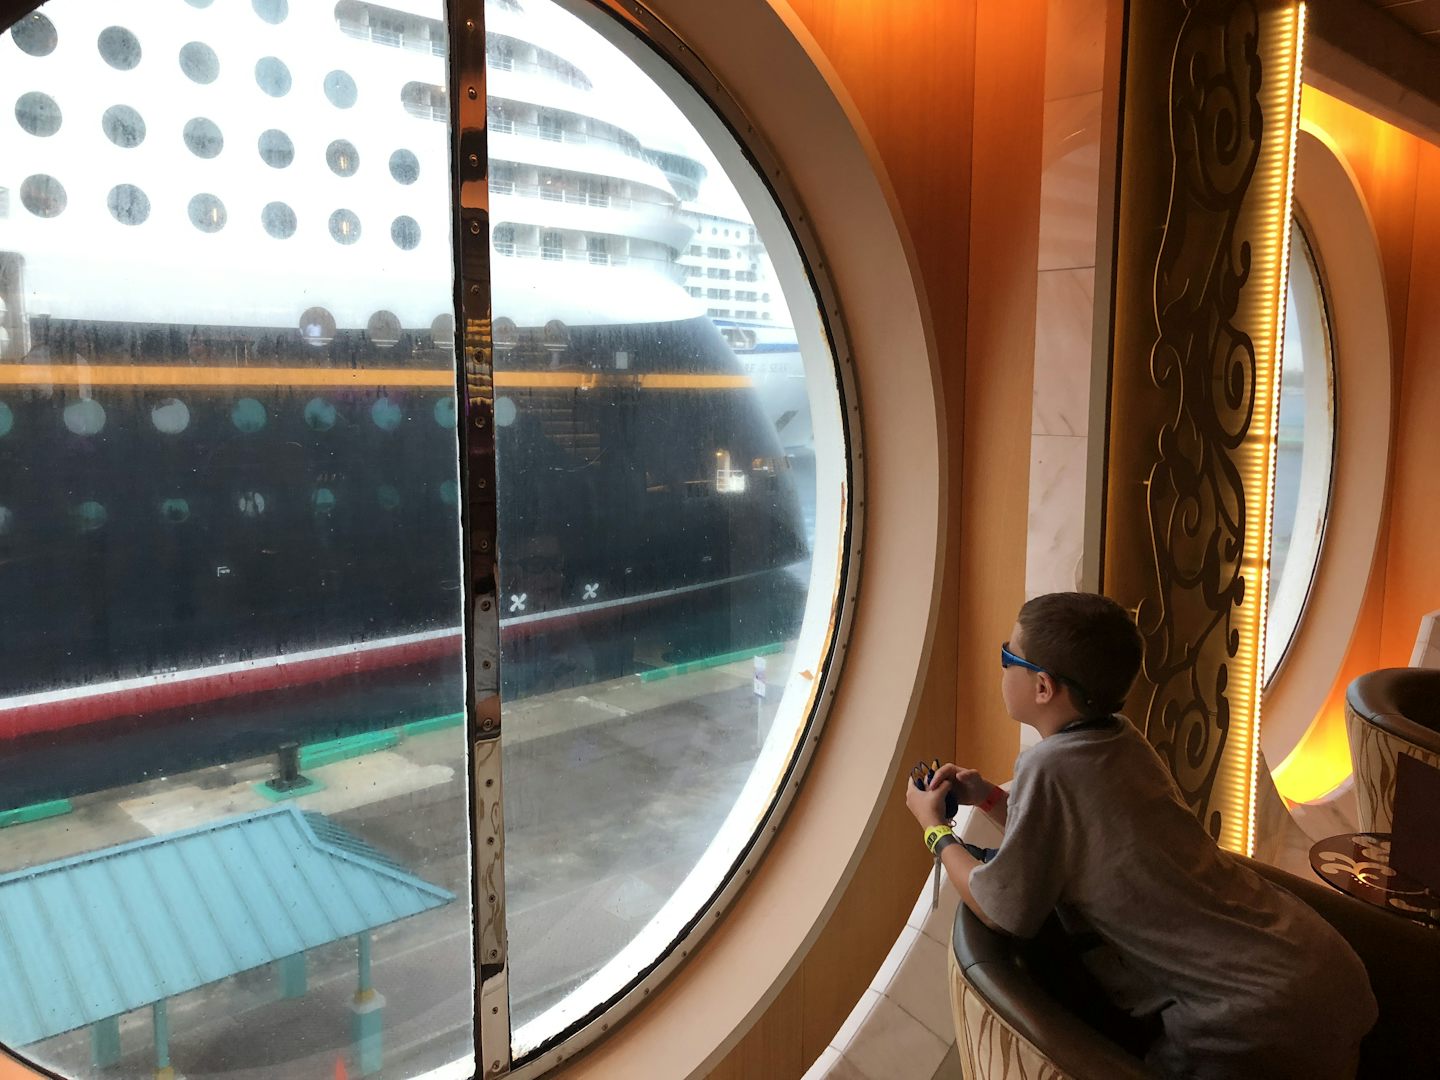 Watching the Disney ship pull out from lounge on Deck 4.